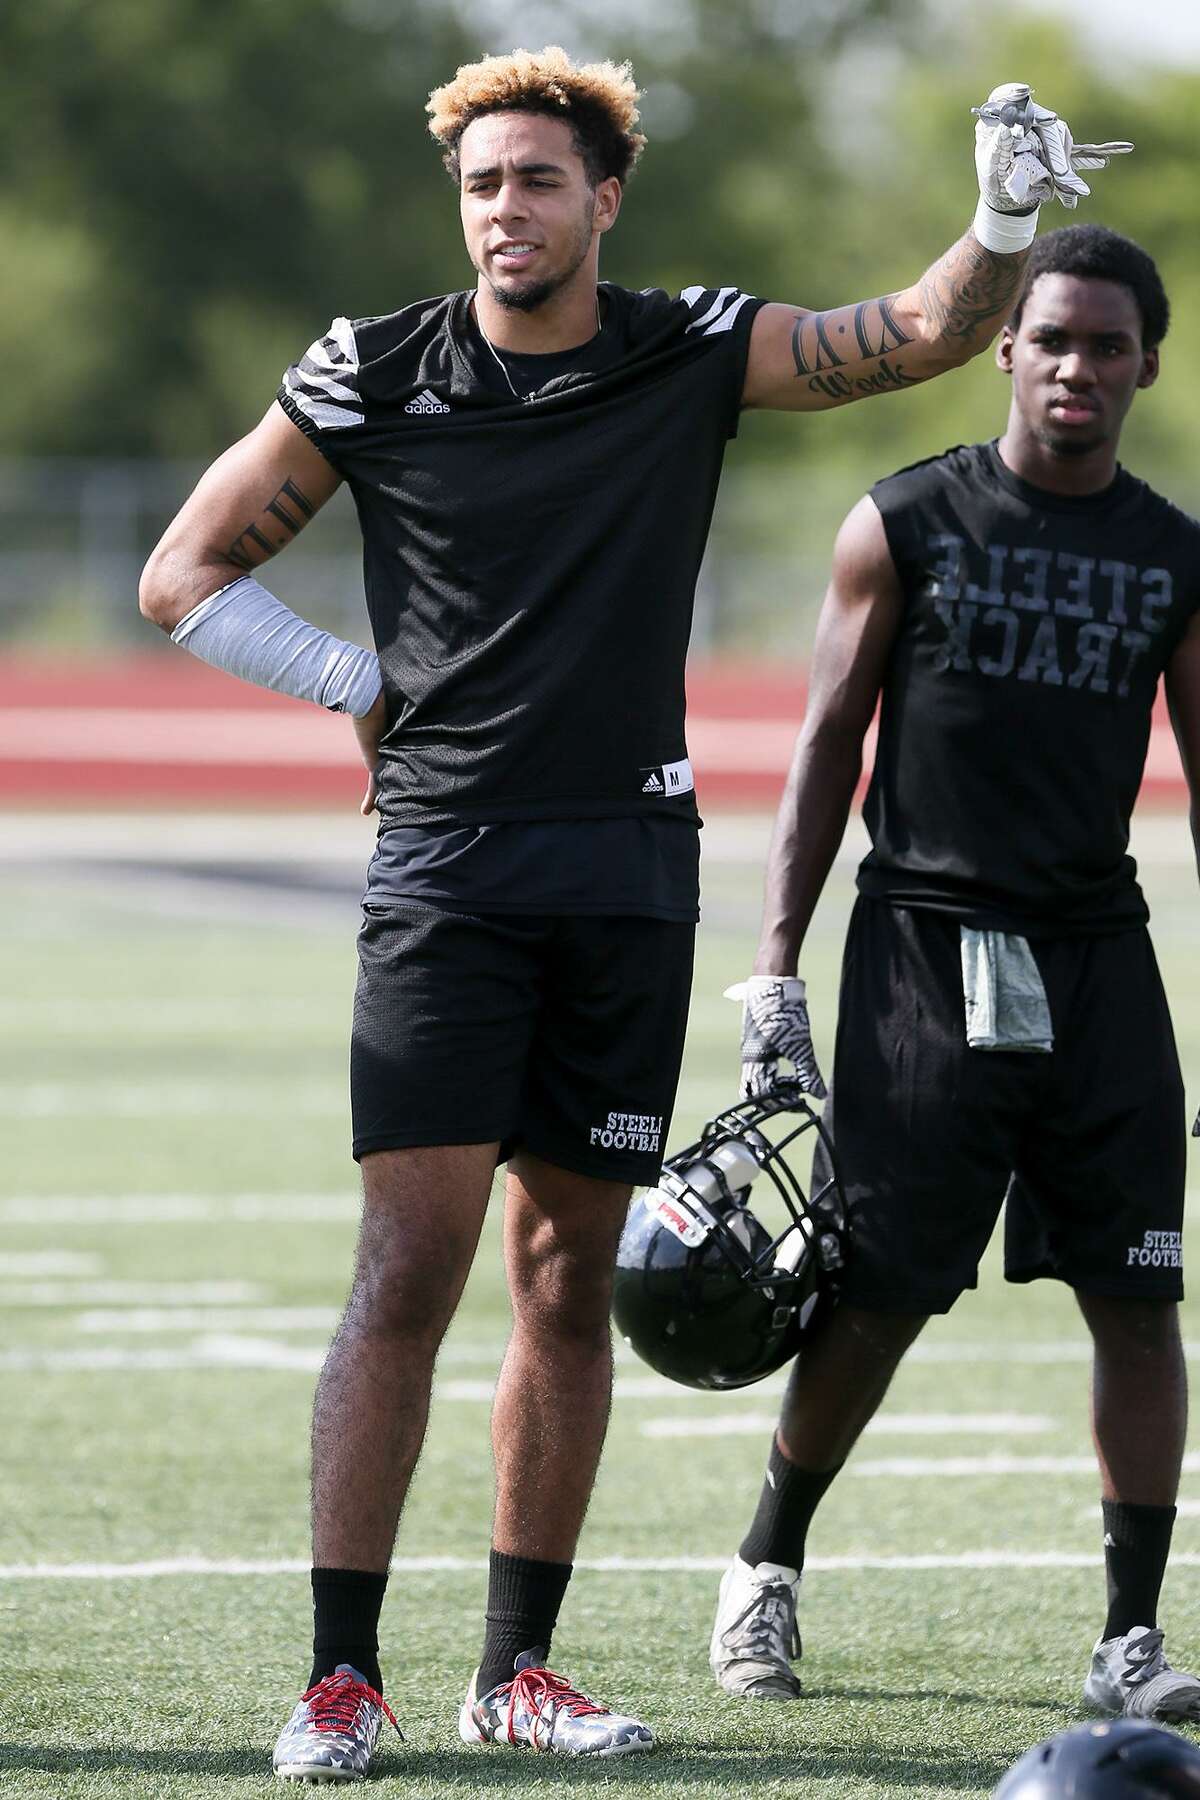 Caden Sterns Steele Football Sr. The rangy 6-1 safety is the area’s top college recruit (2018 class) and ranked fifth in the state, according to 247sports.com. Sterns is committed to Texas and has 28 tackles and one interception this season.